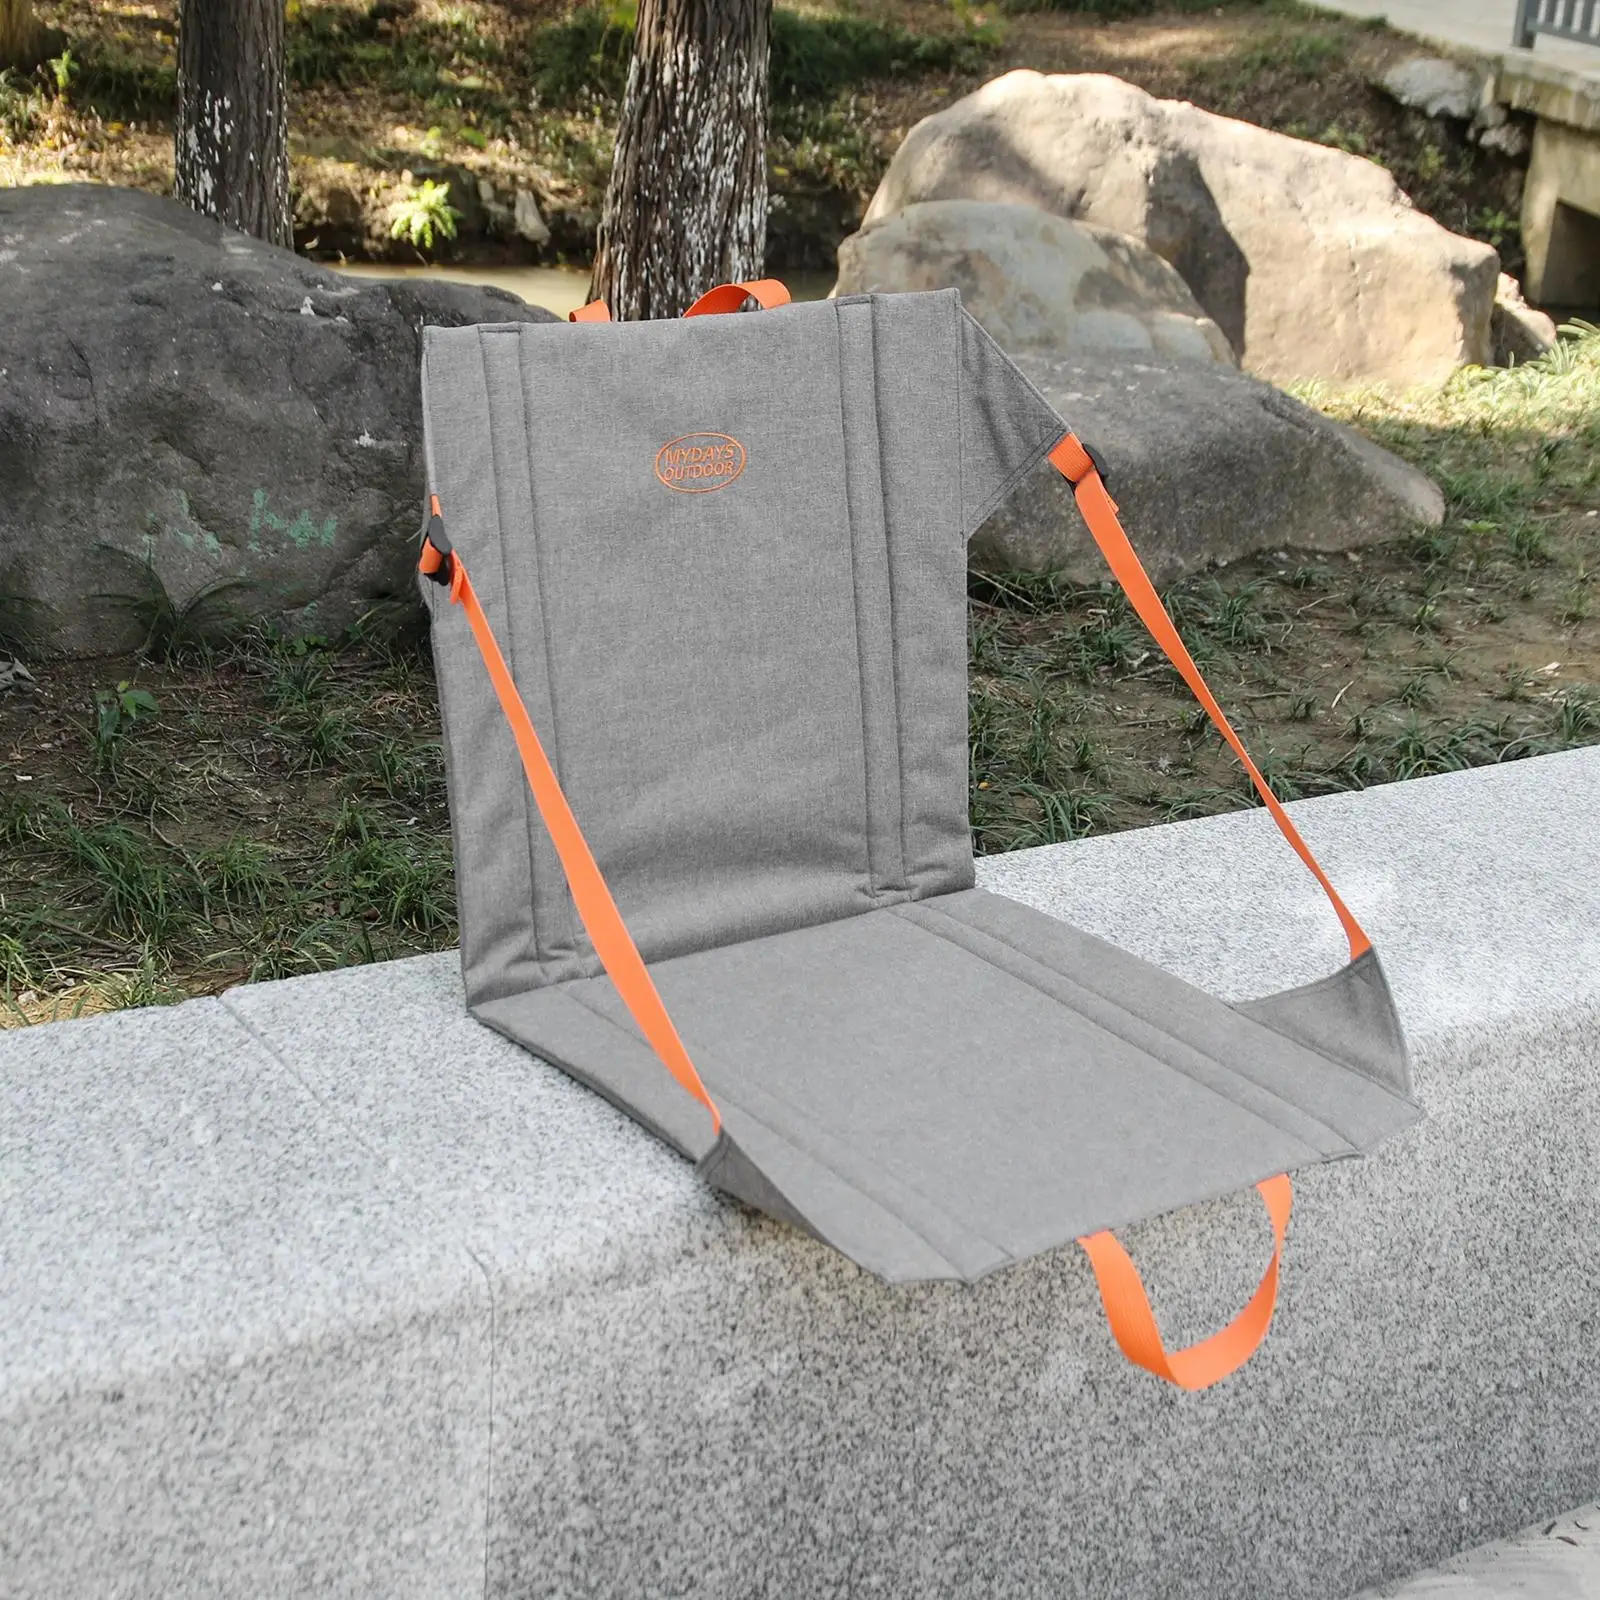 Stadium Seat Cushion Padded Seat for Outdoor Concerts Sports Events Fishing